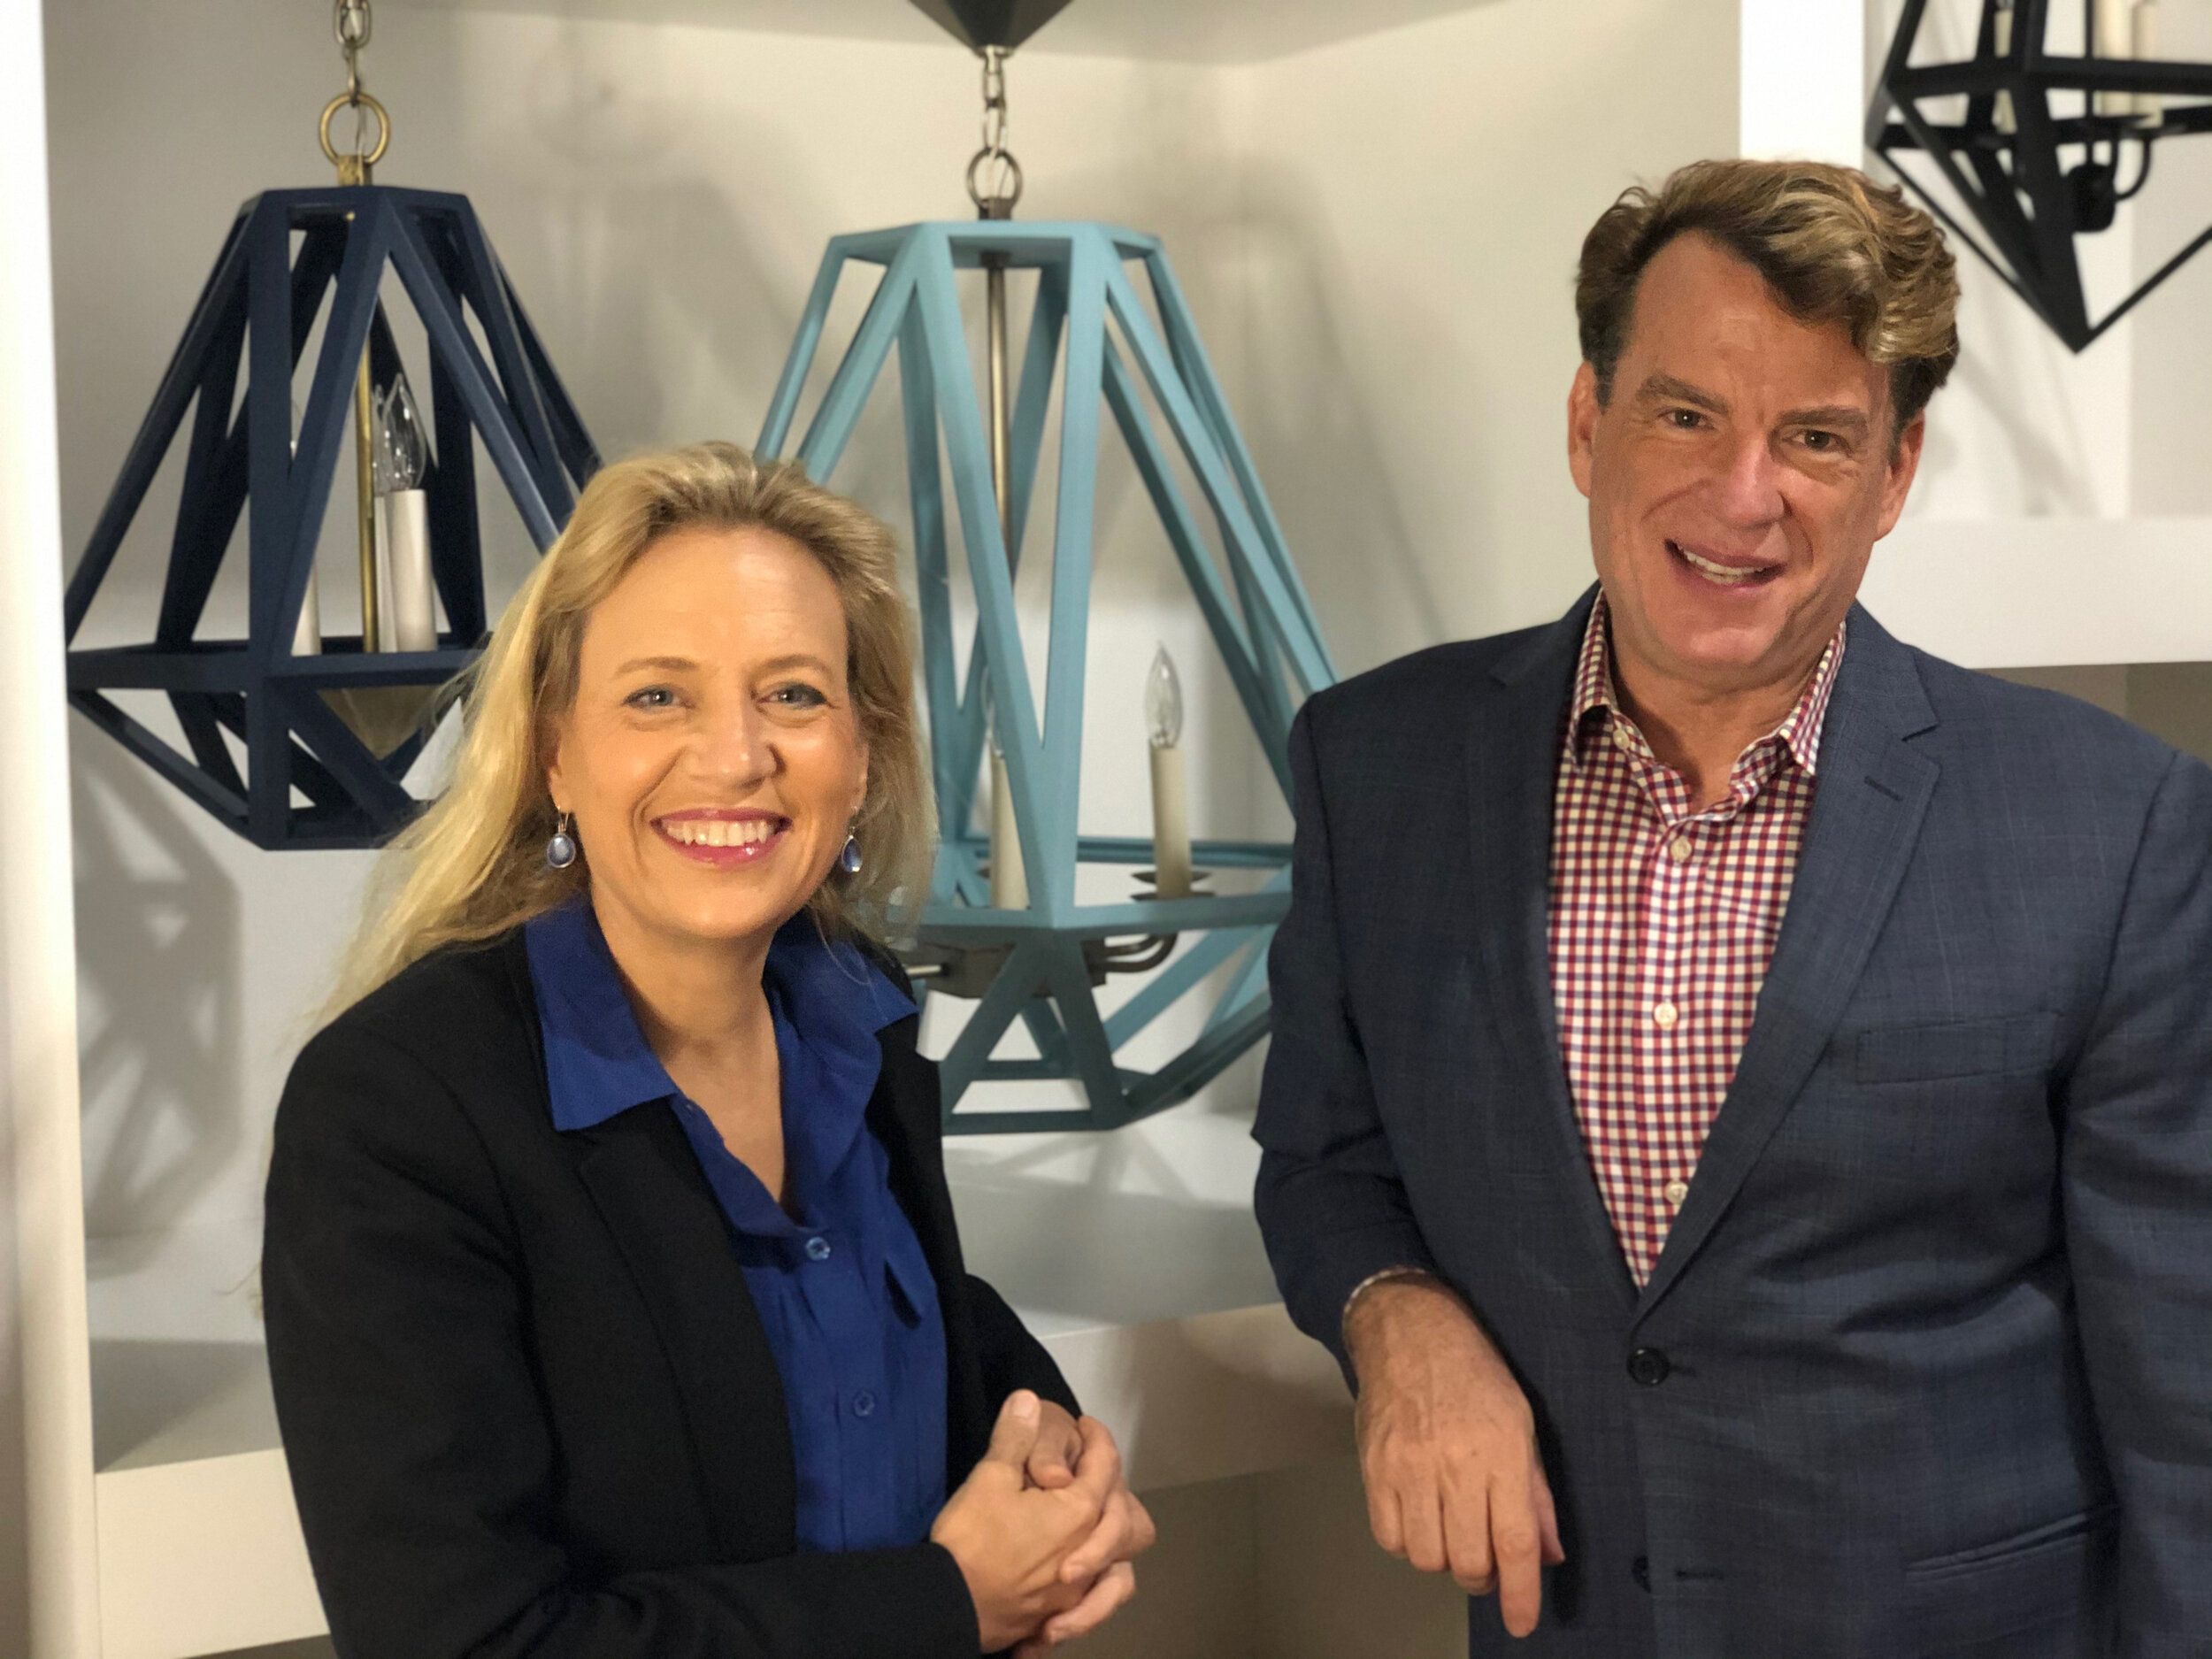 Lauren Wylonis, left, KingsHaven founder, CEO and lead designer, and Andrew Raemsch, national sales director and New York showroom manager.